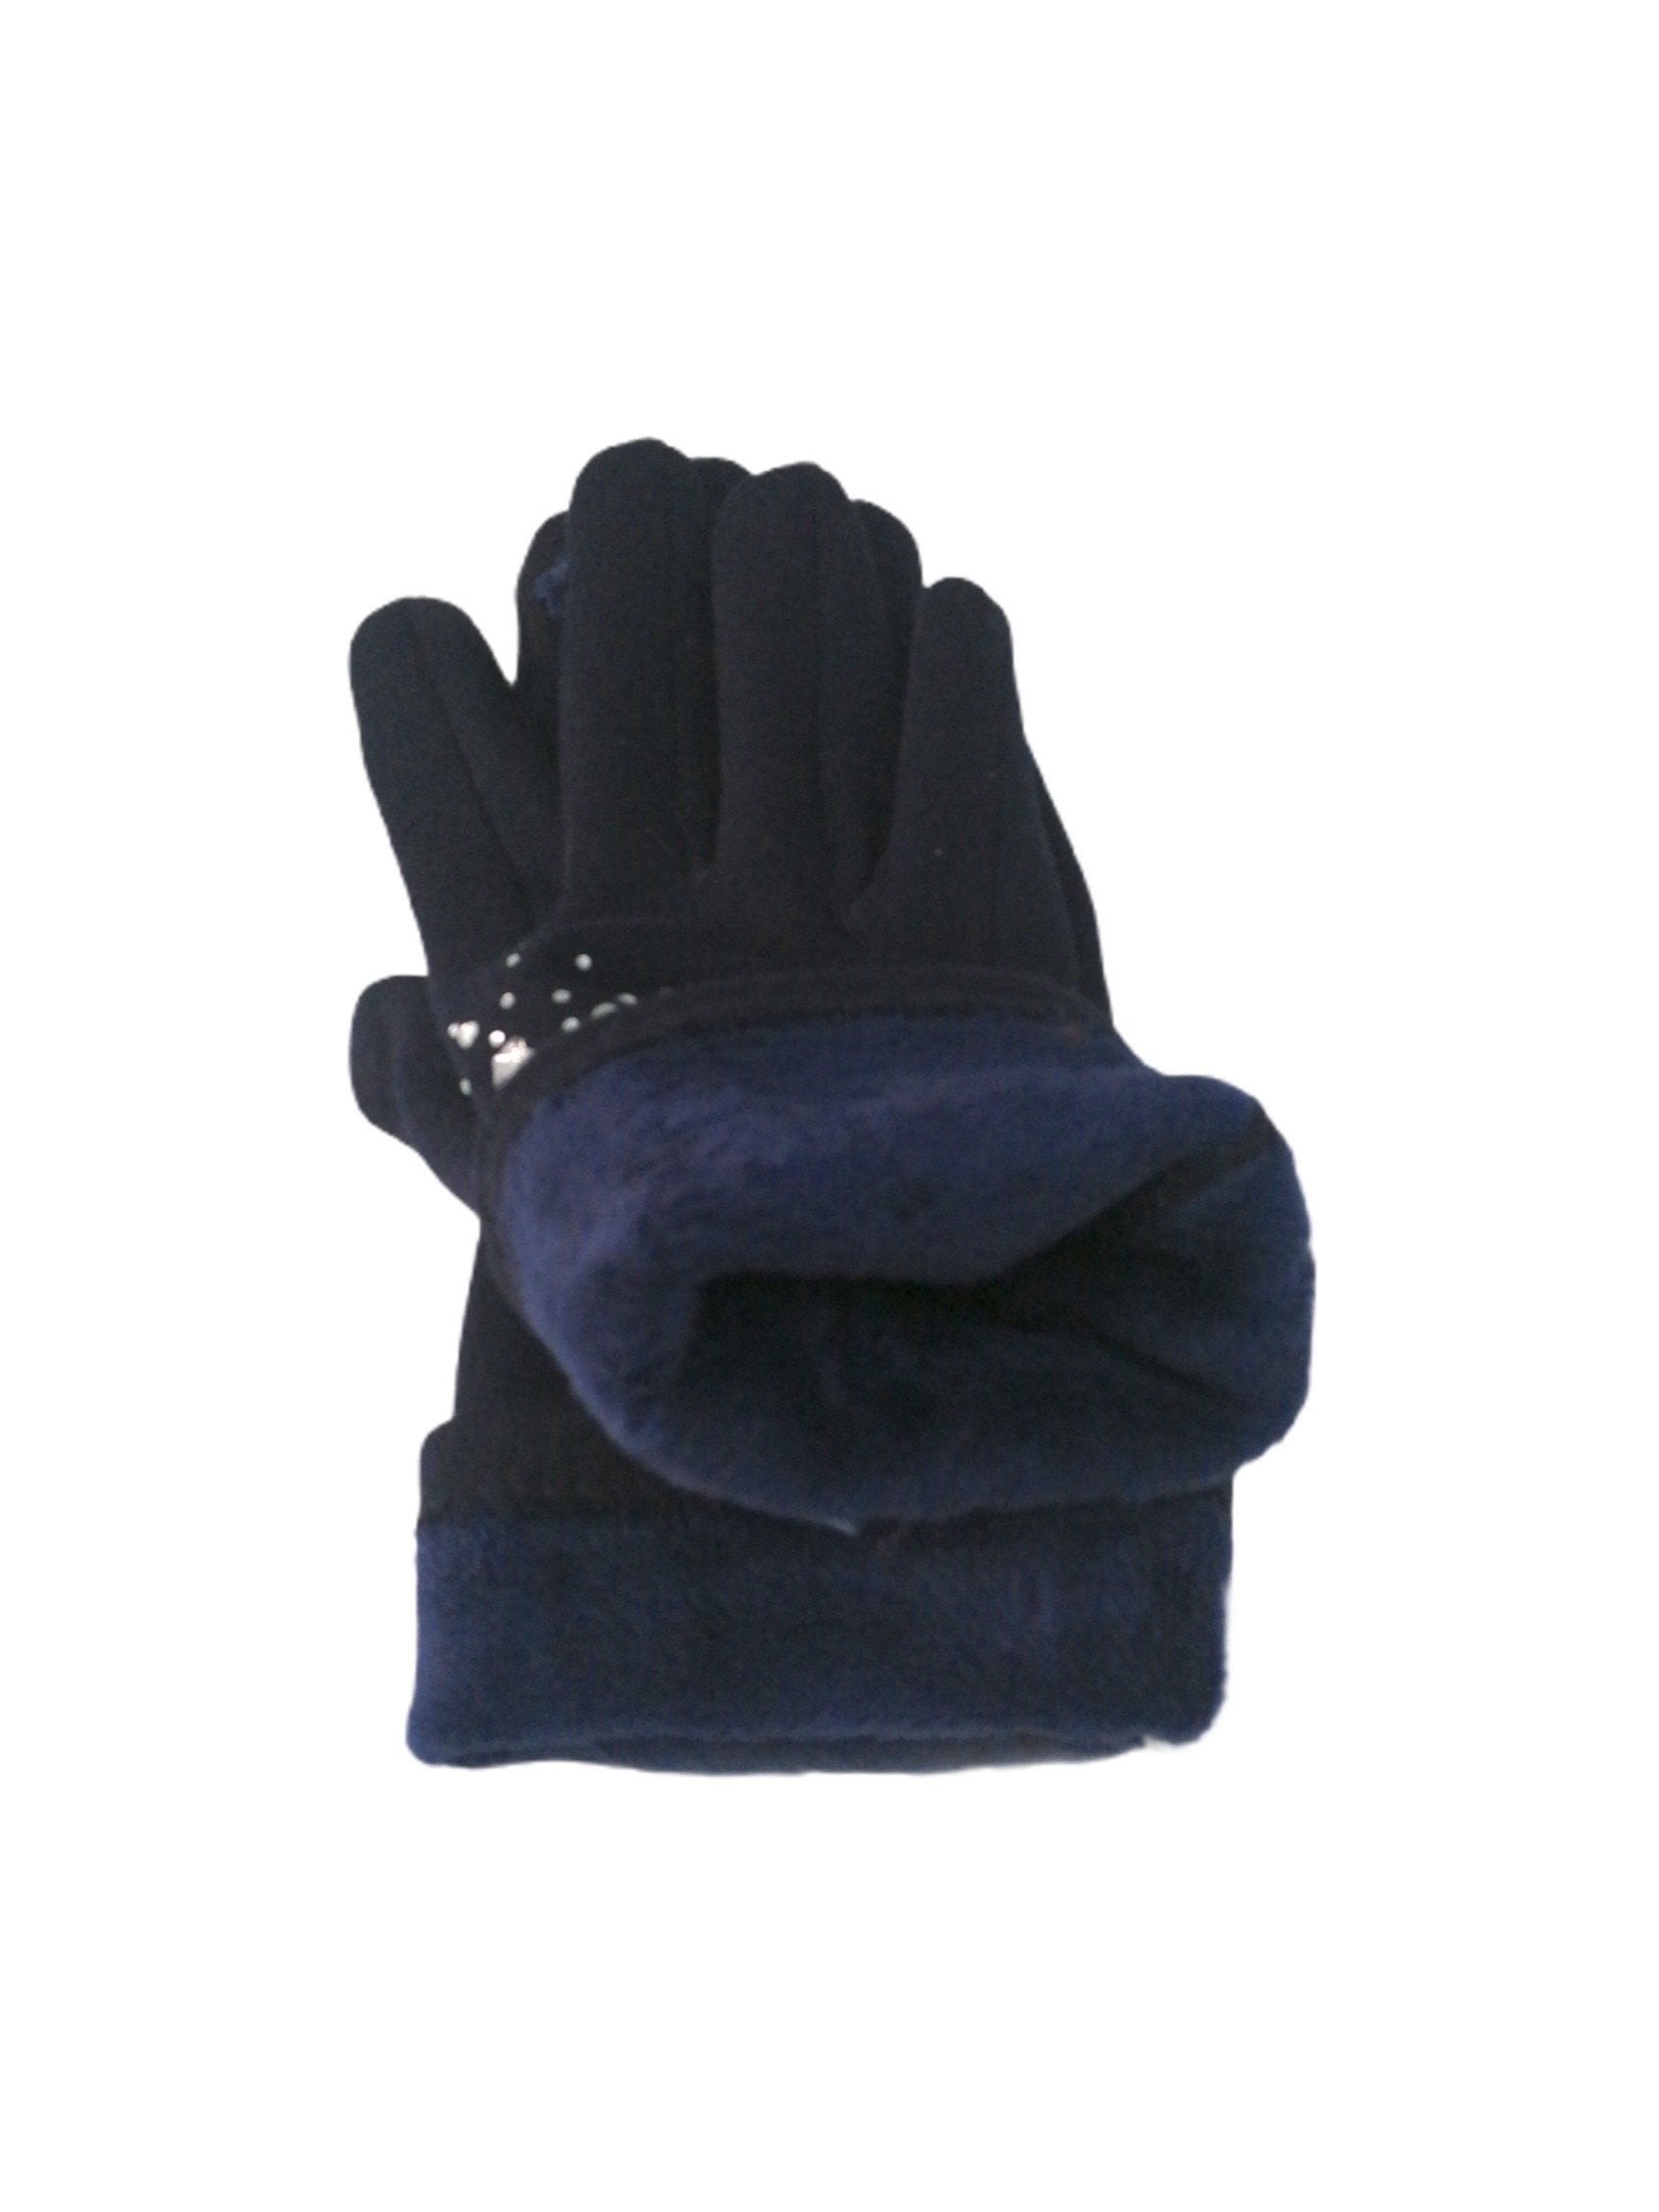 Tactile gloves with star pattern lining (x12)